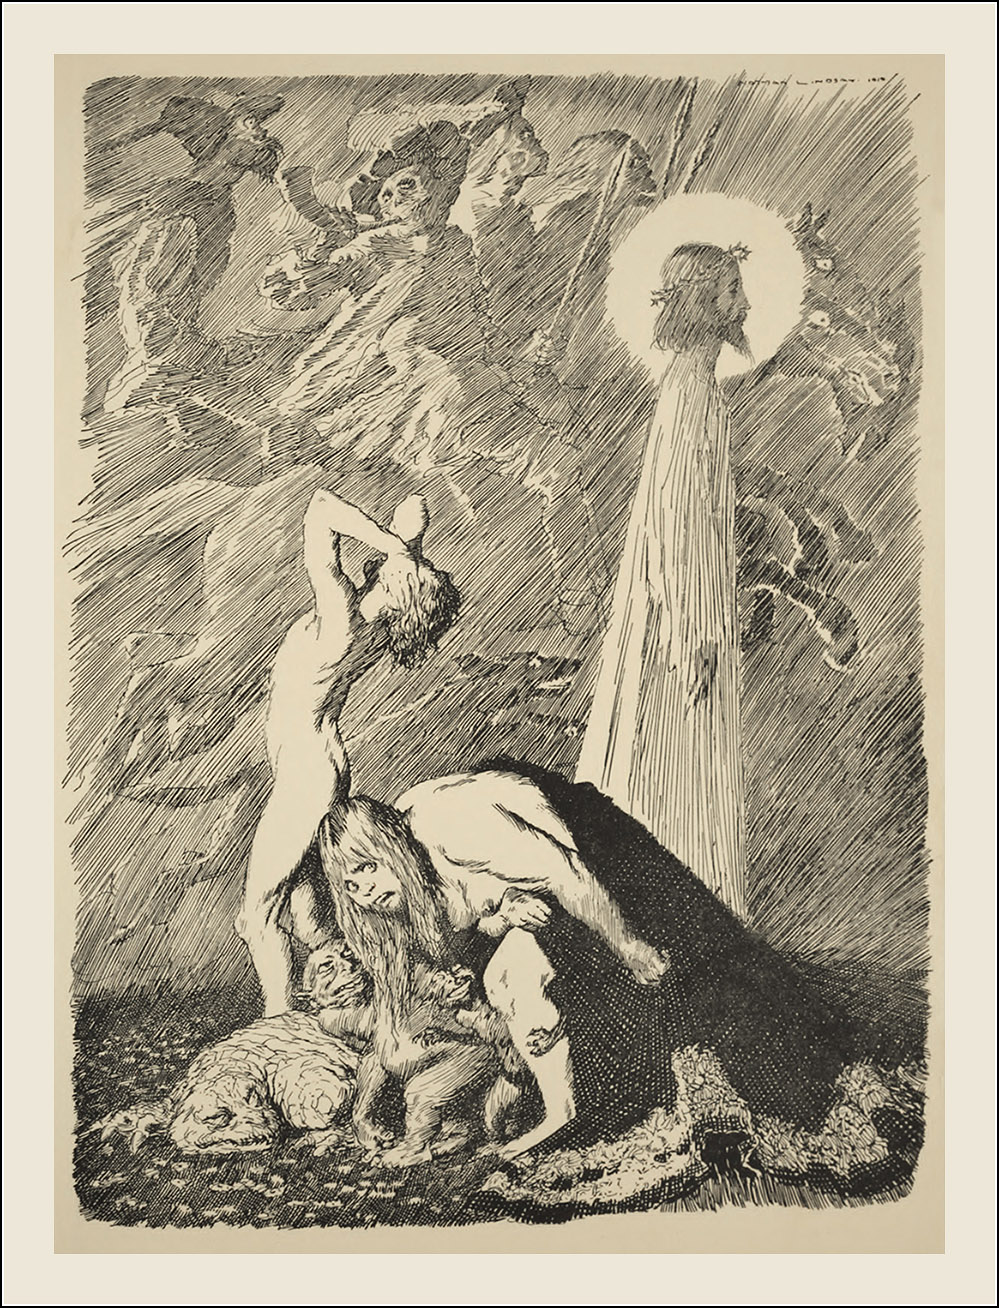 Norman Lindsay - Illustration from Colombine, published 1920 by Angus and Robertson in Sydney